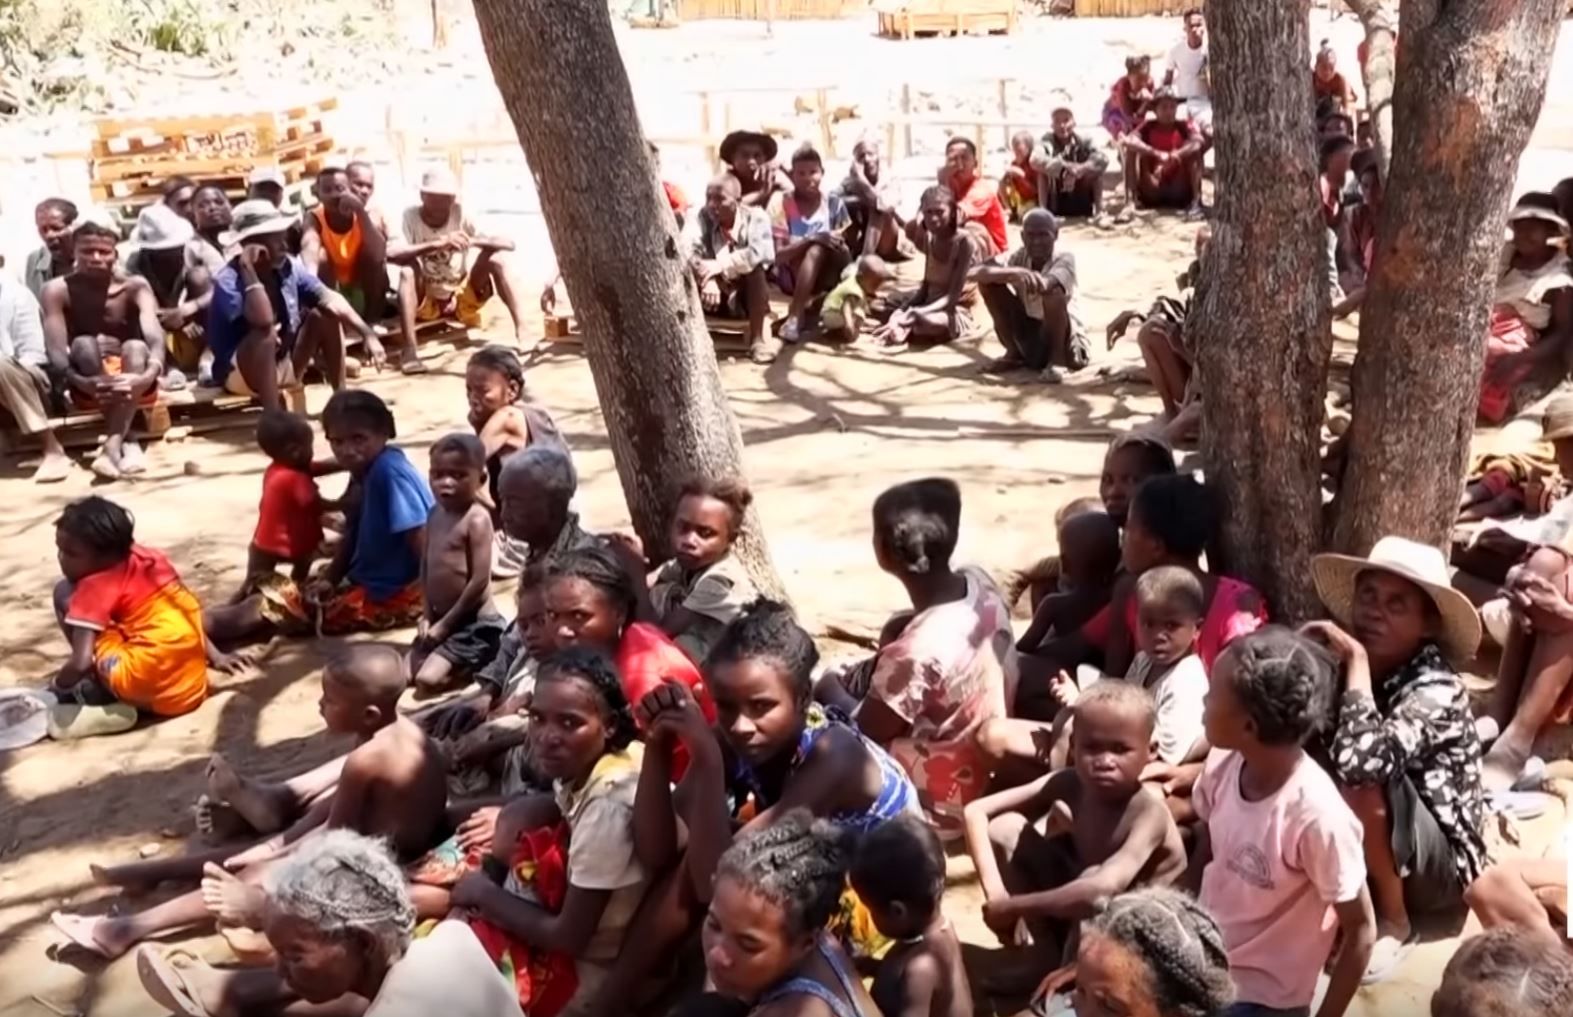 In southern Madagascar, people are dying of hunger